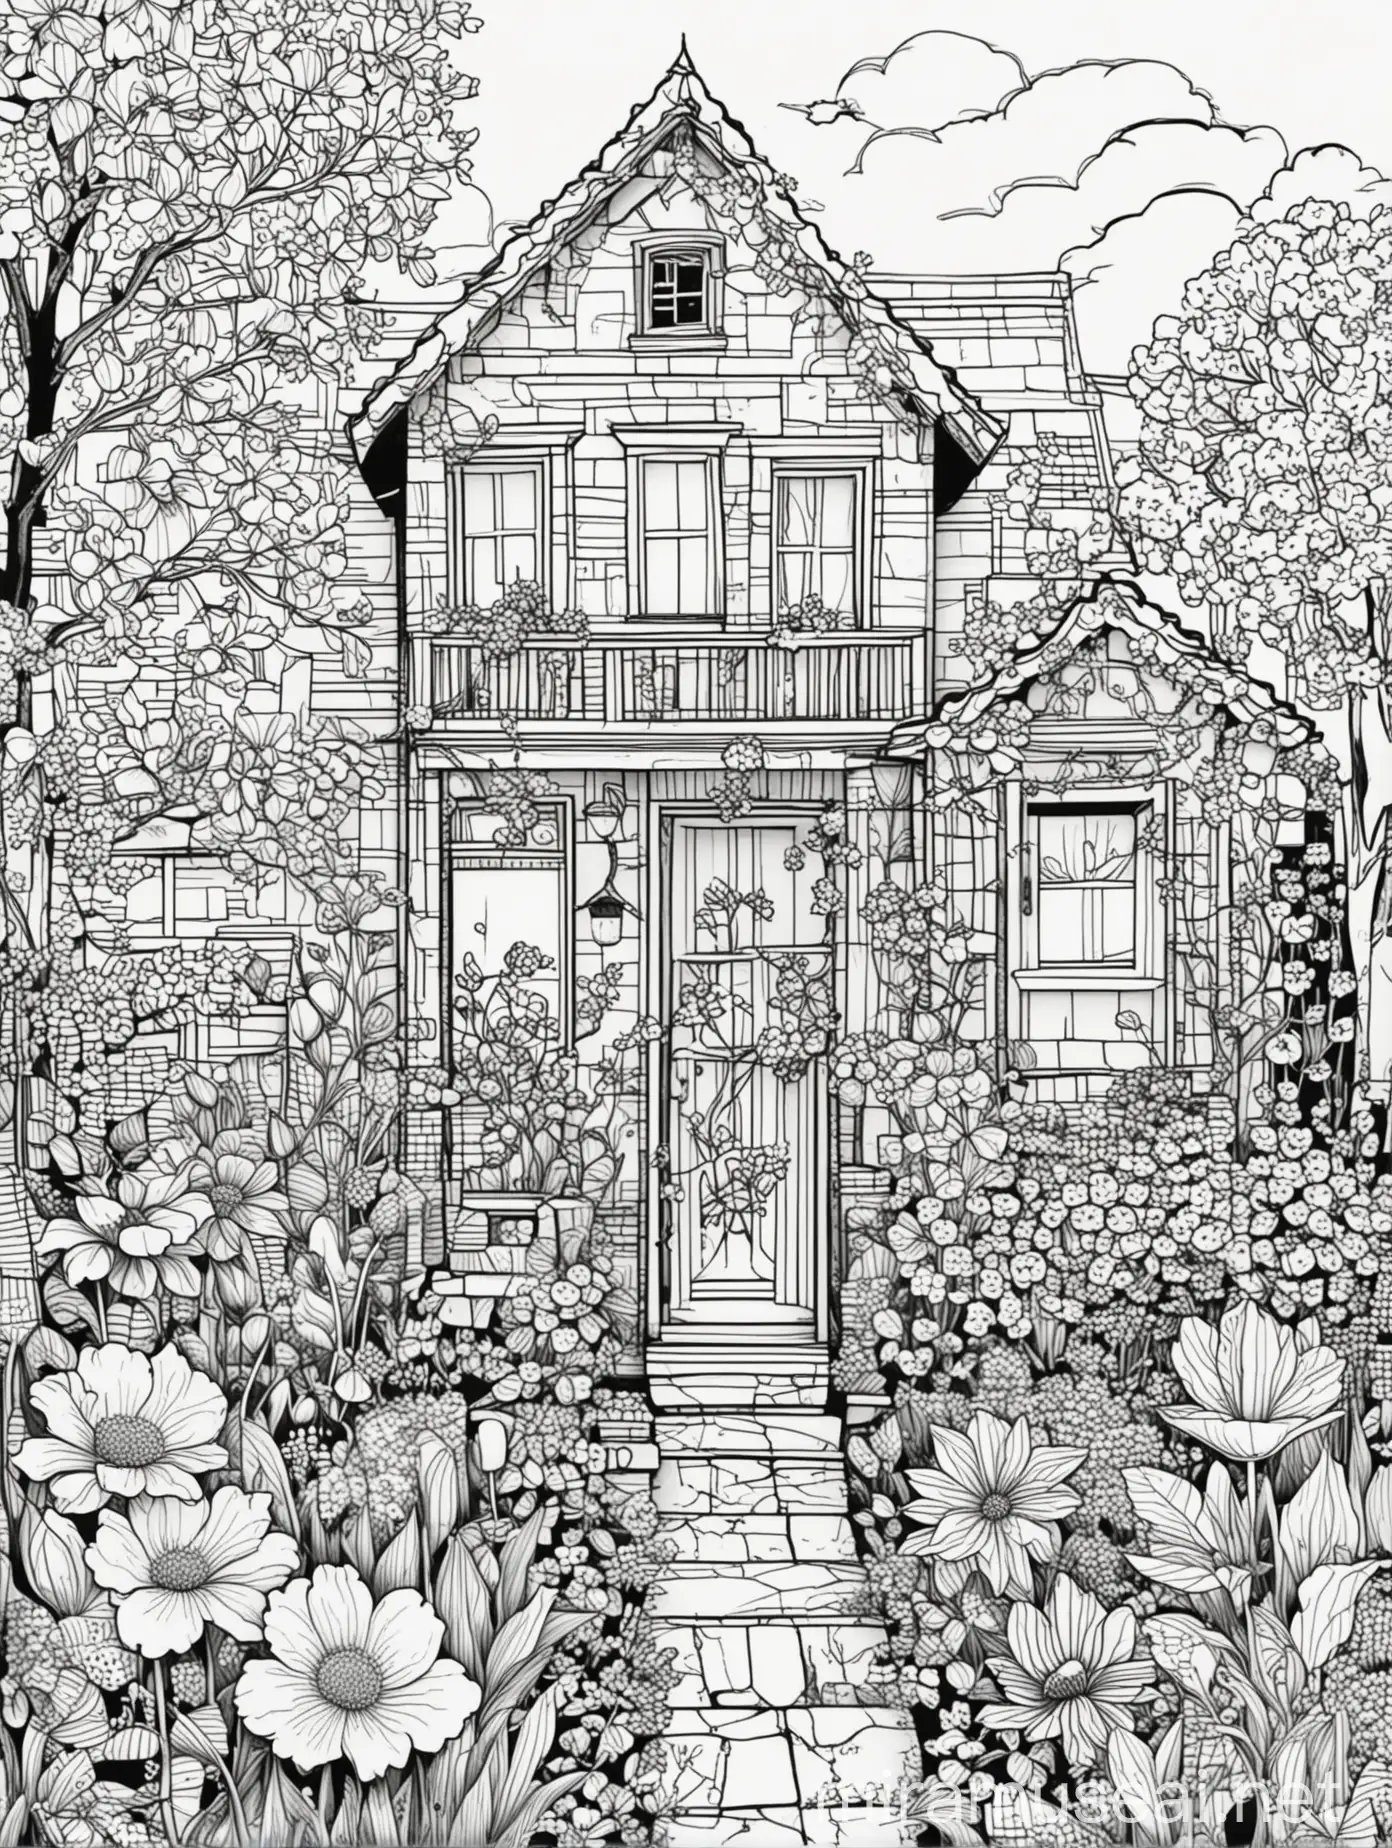 Spring Coloring Page with Flowers and House Black and White Line Art